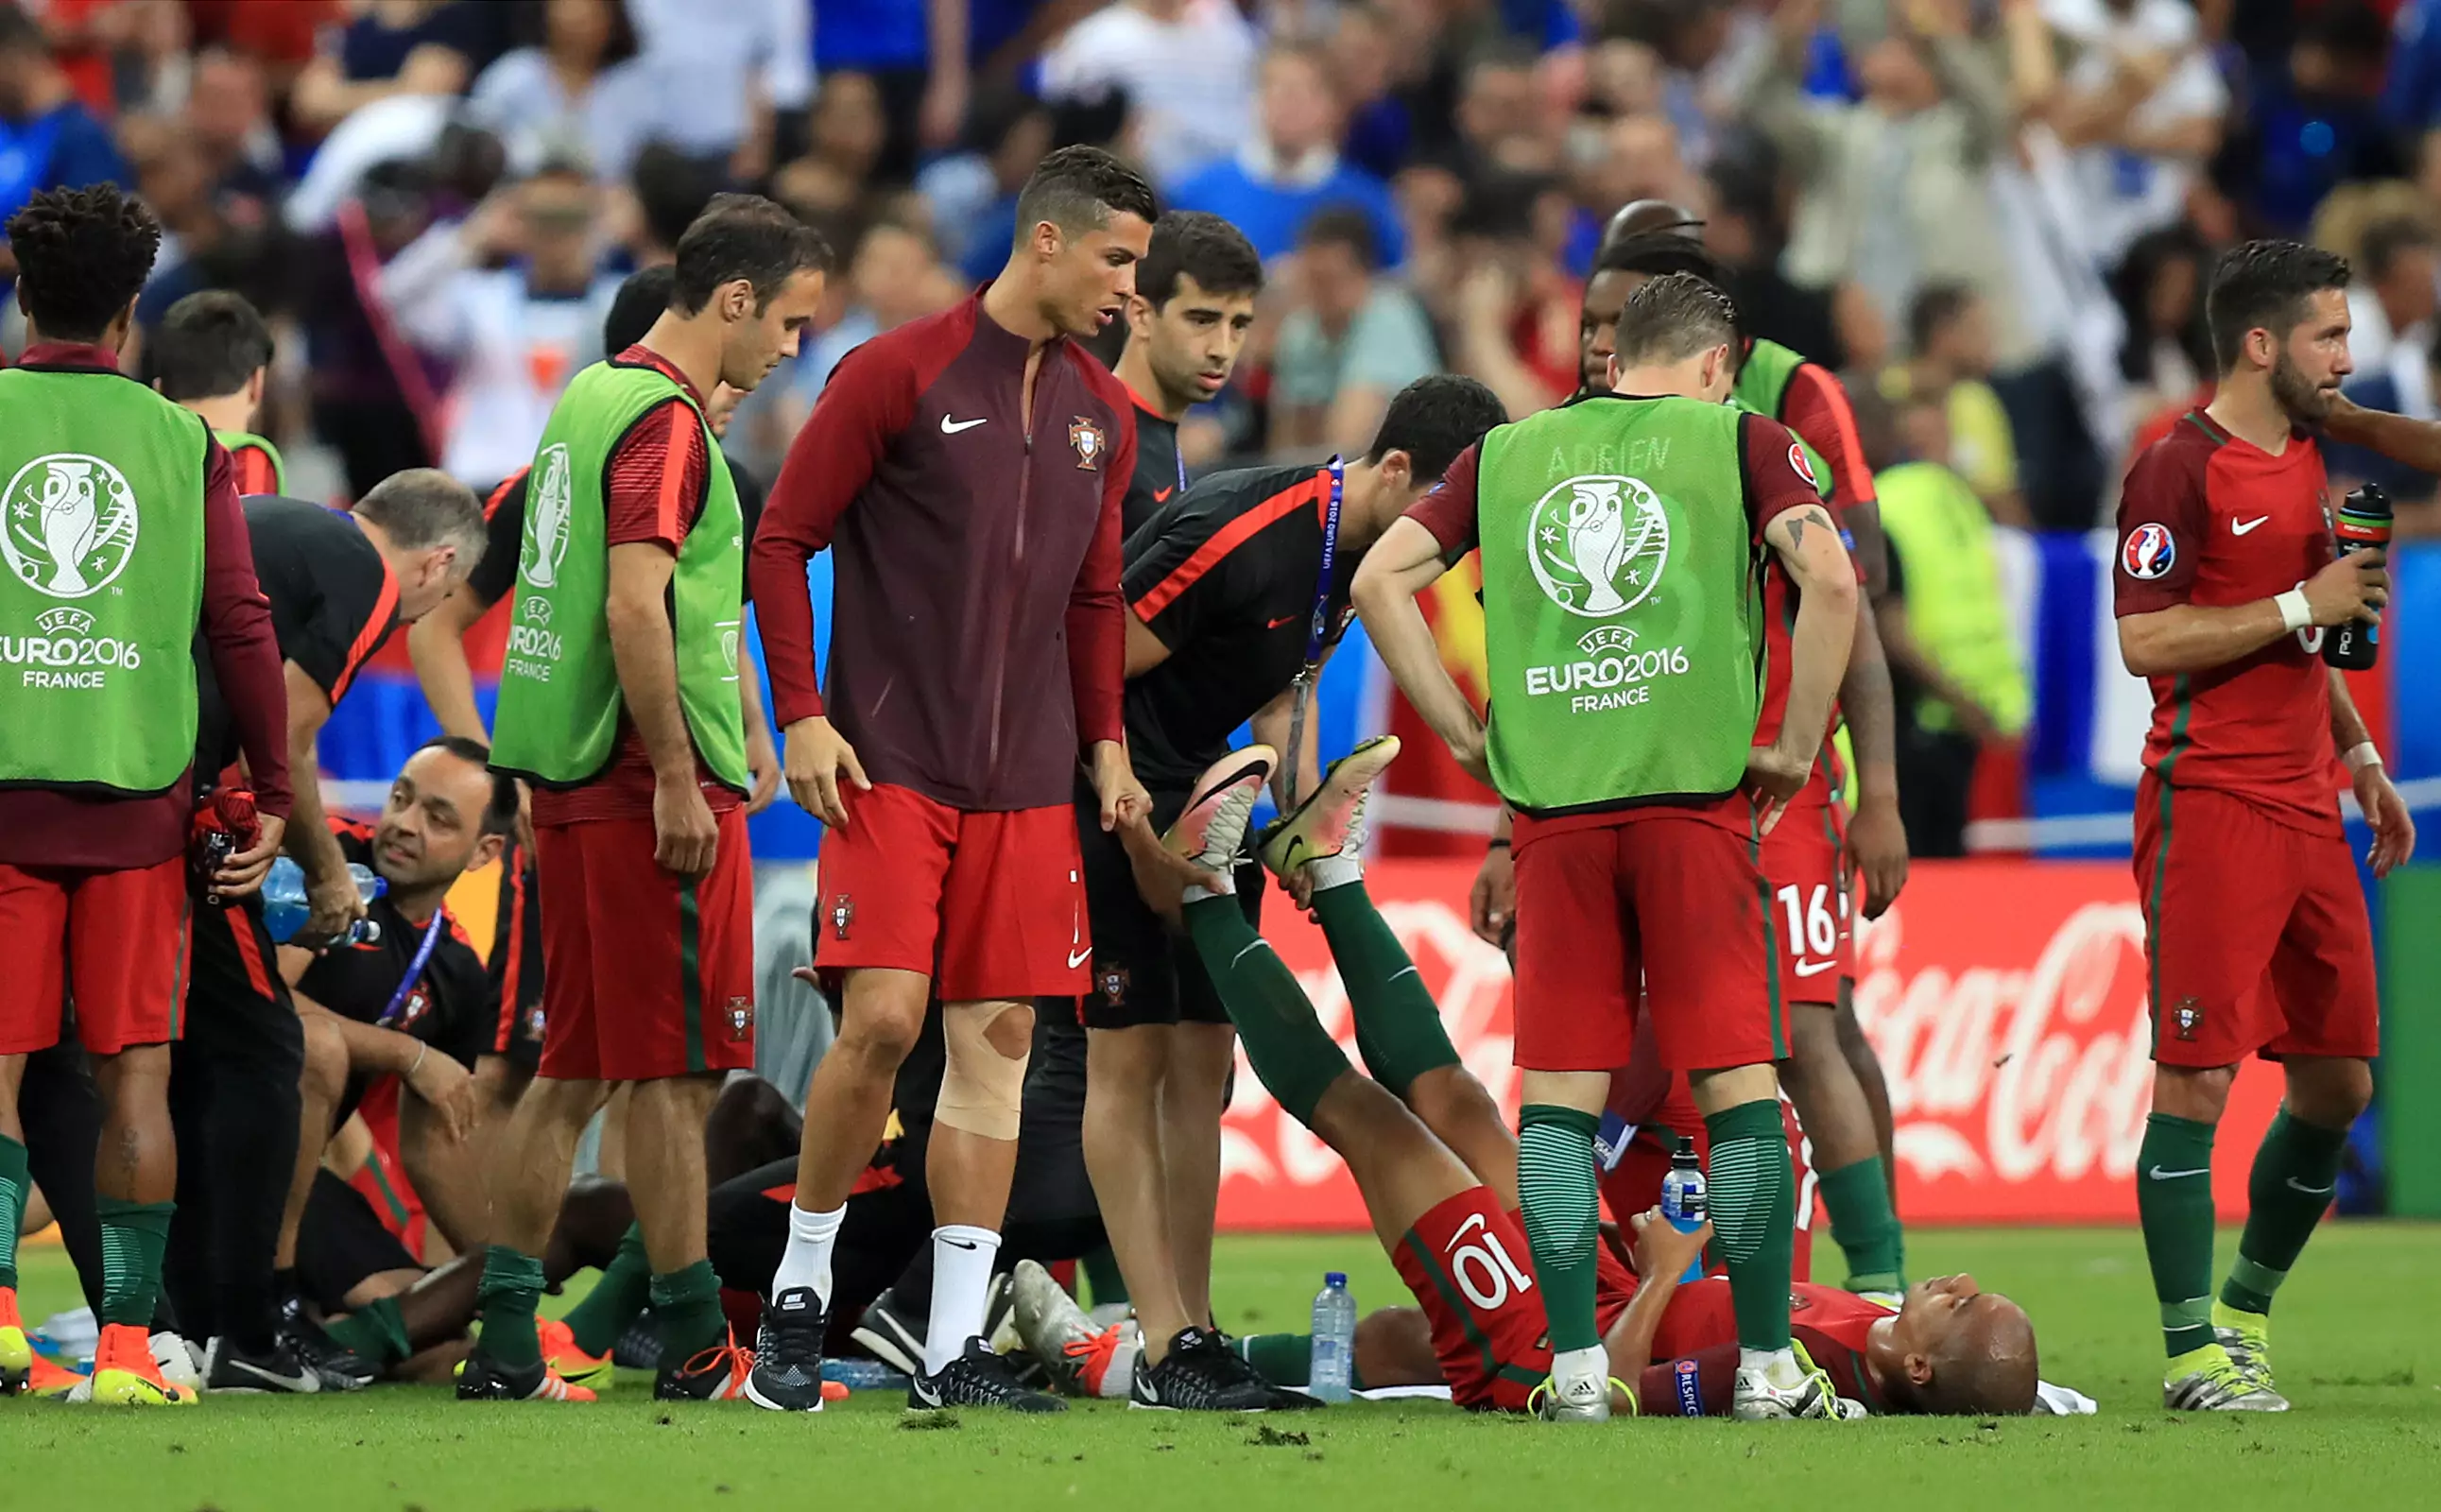 Ronaldo was virtually managing at times, including at extra time. Image: PA Images